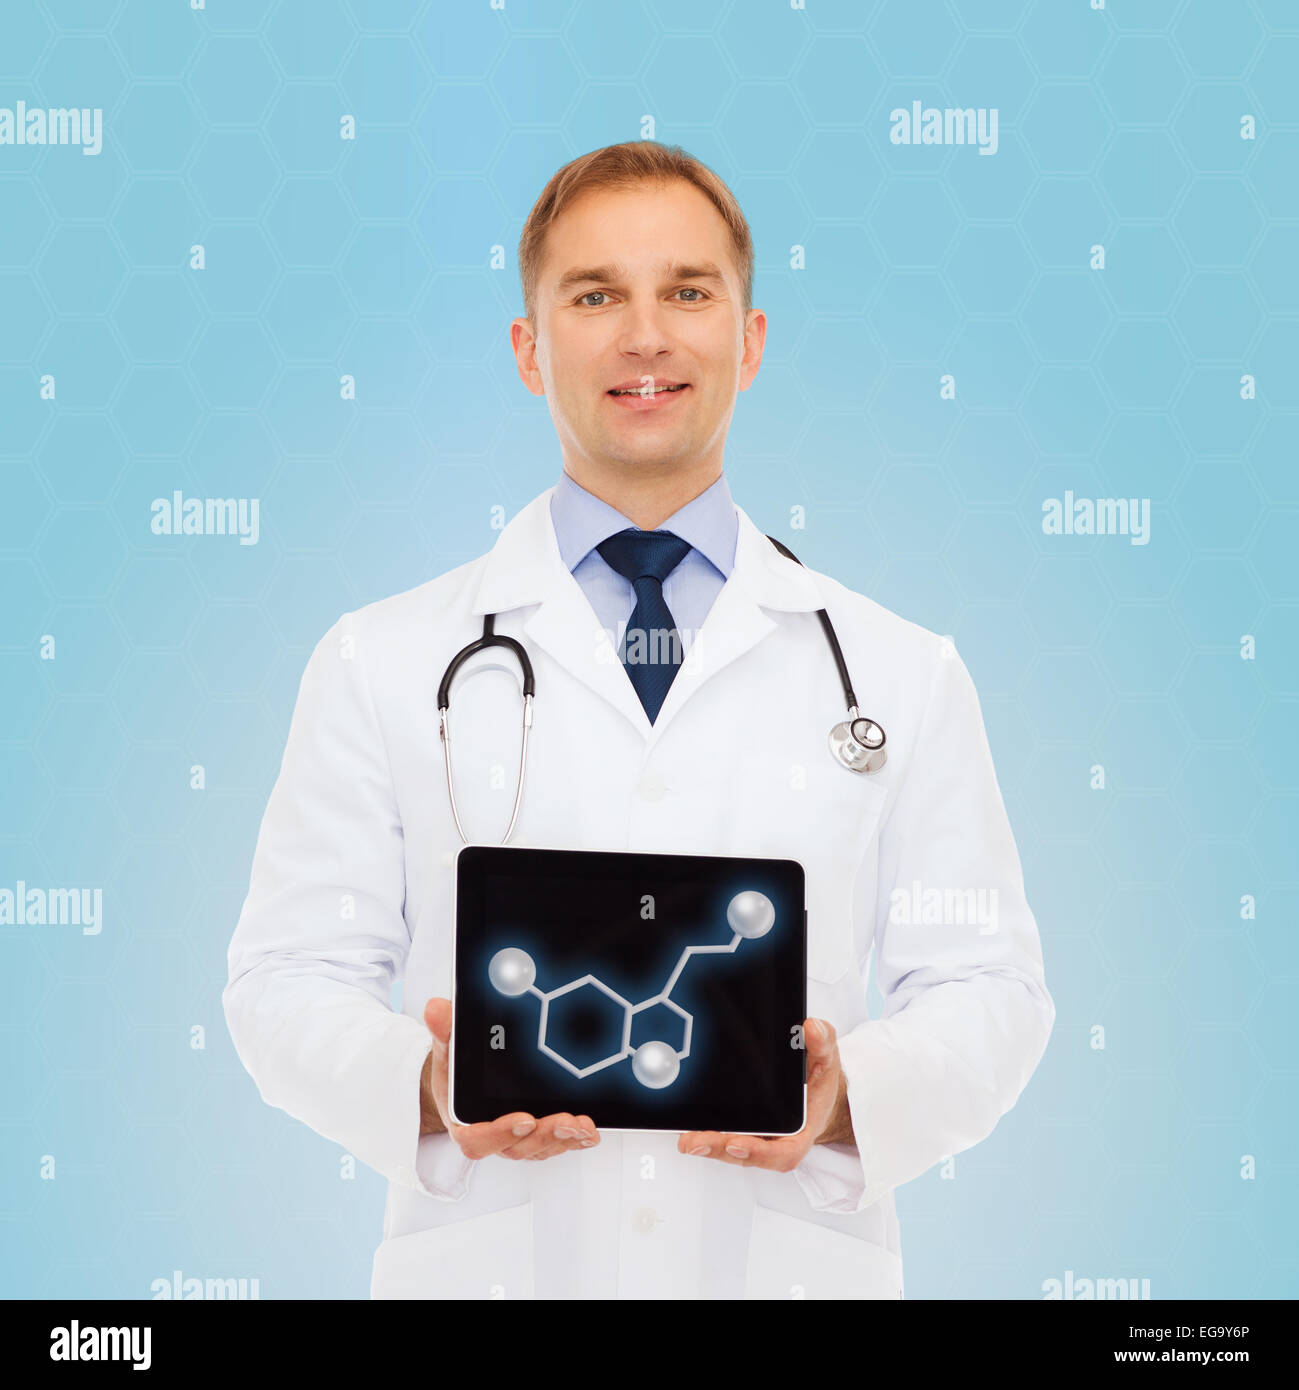 smiling male doctor showing tablet pc screen Stock Photo